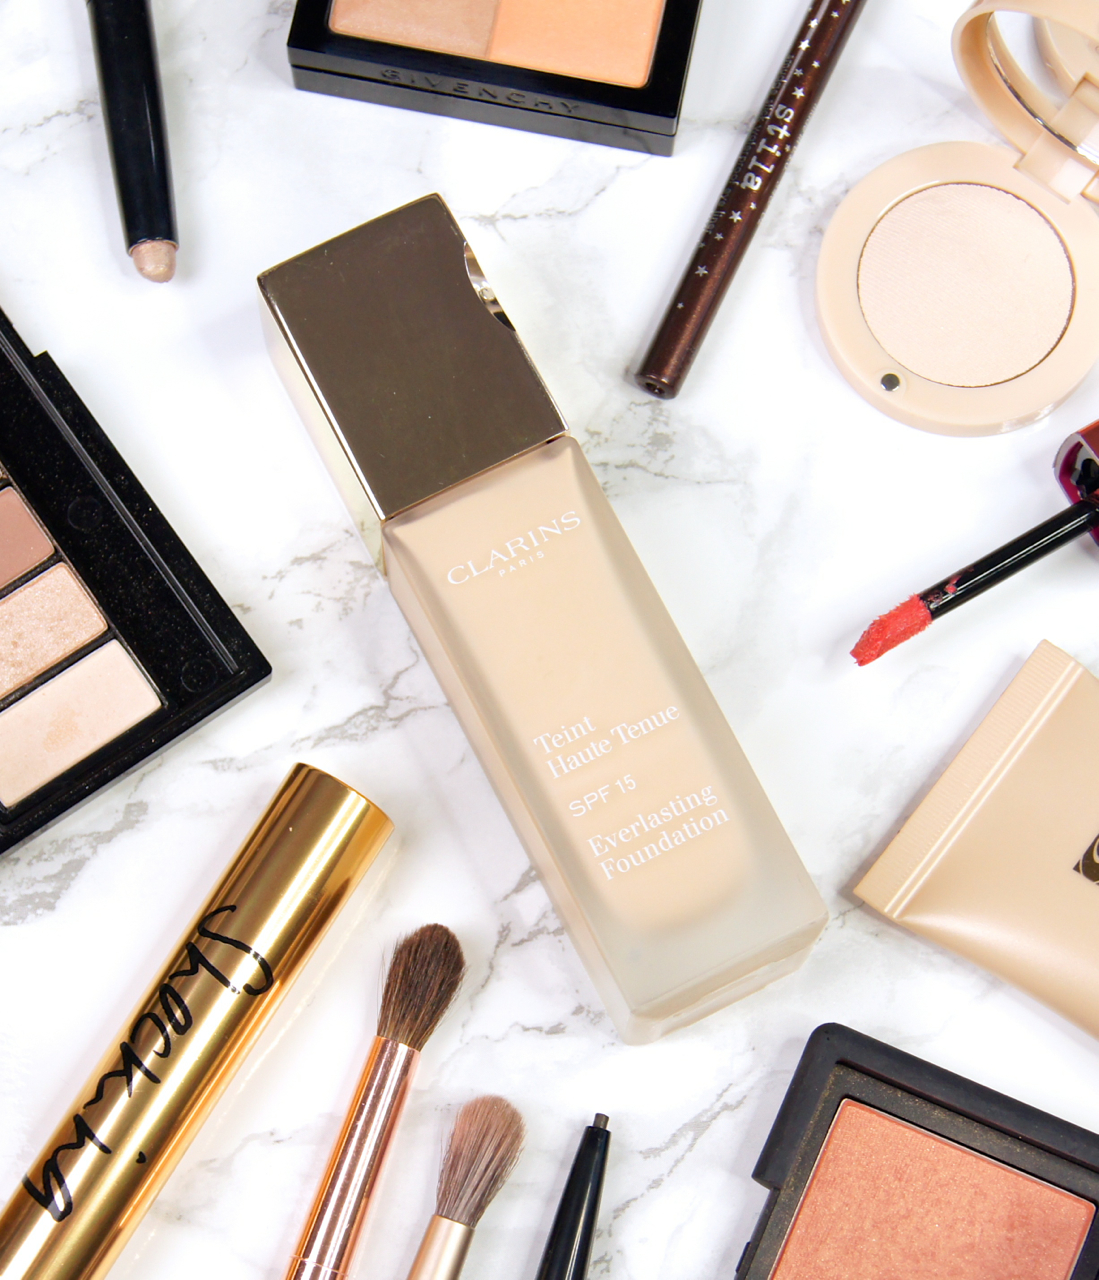 clarins everlasting foundation review swatches high coverage comfortable natural no caking